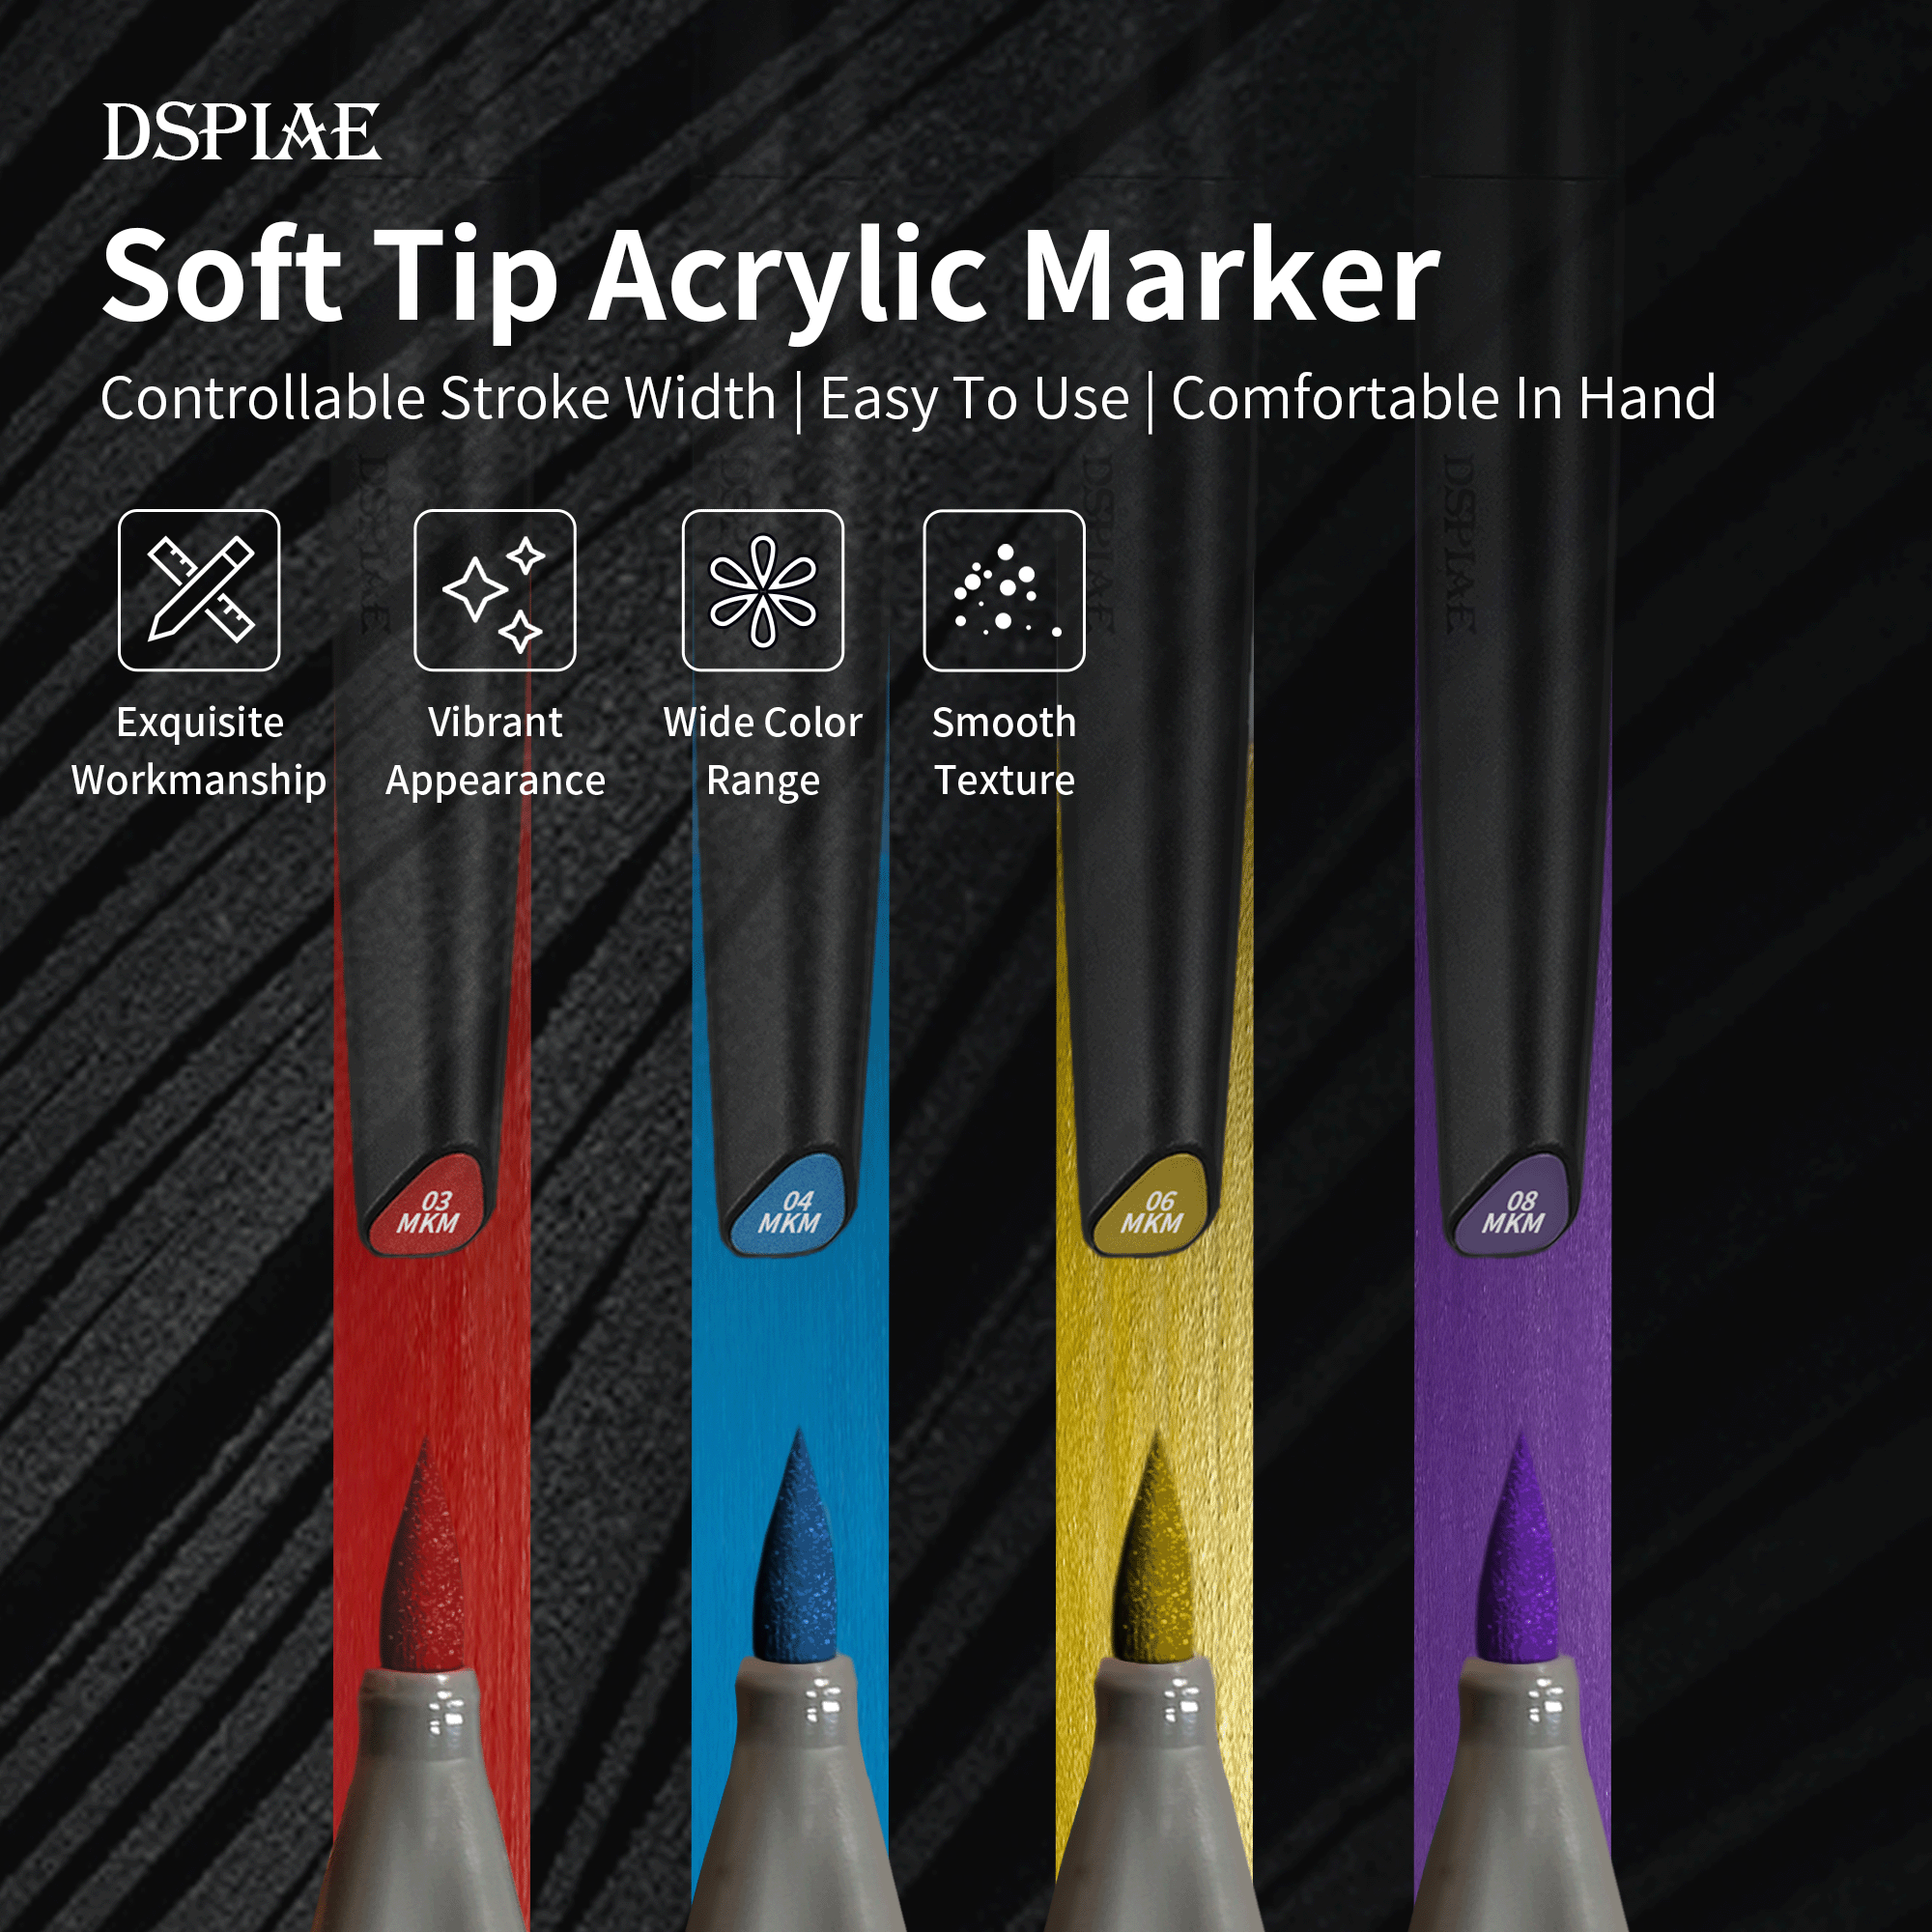 DSPIAE MKM Soft Tip Acrylic Marker - Metallic Colors